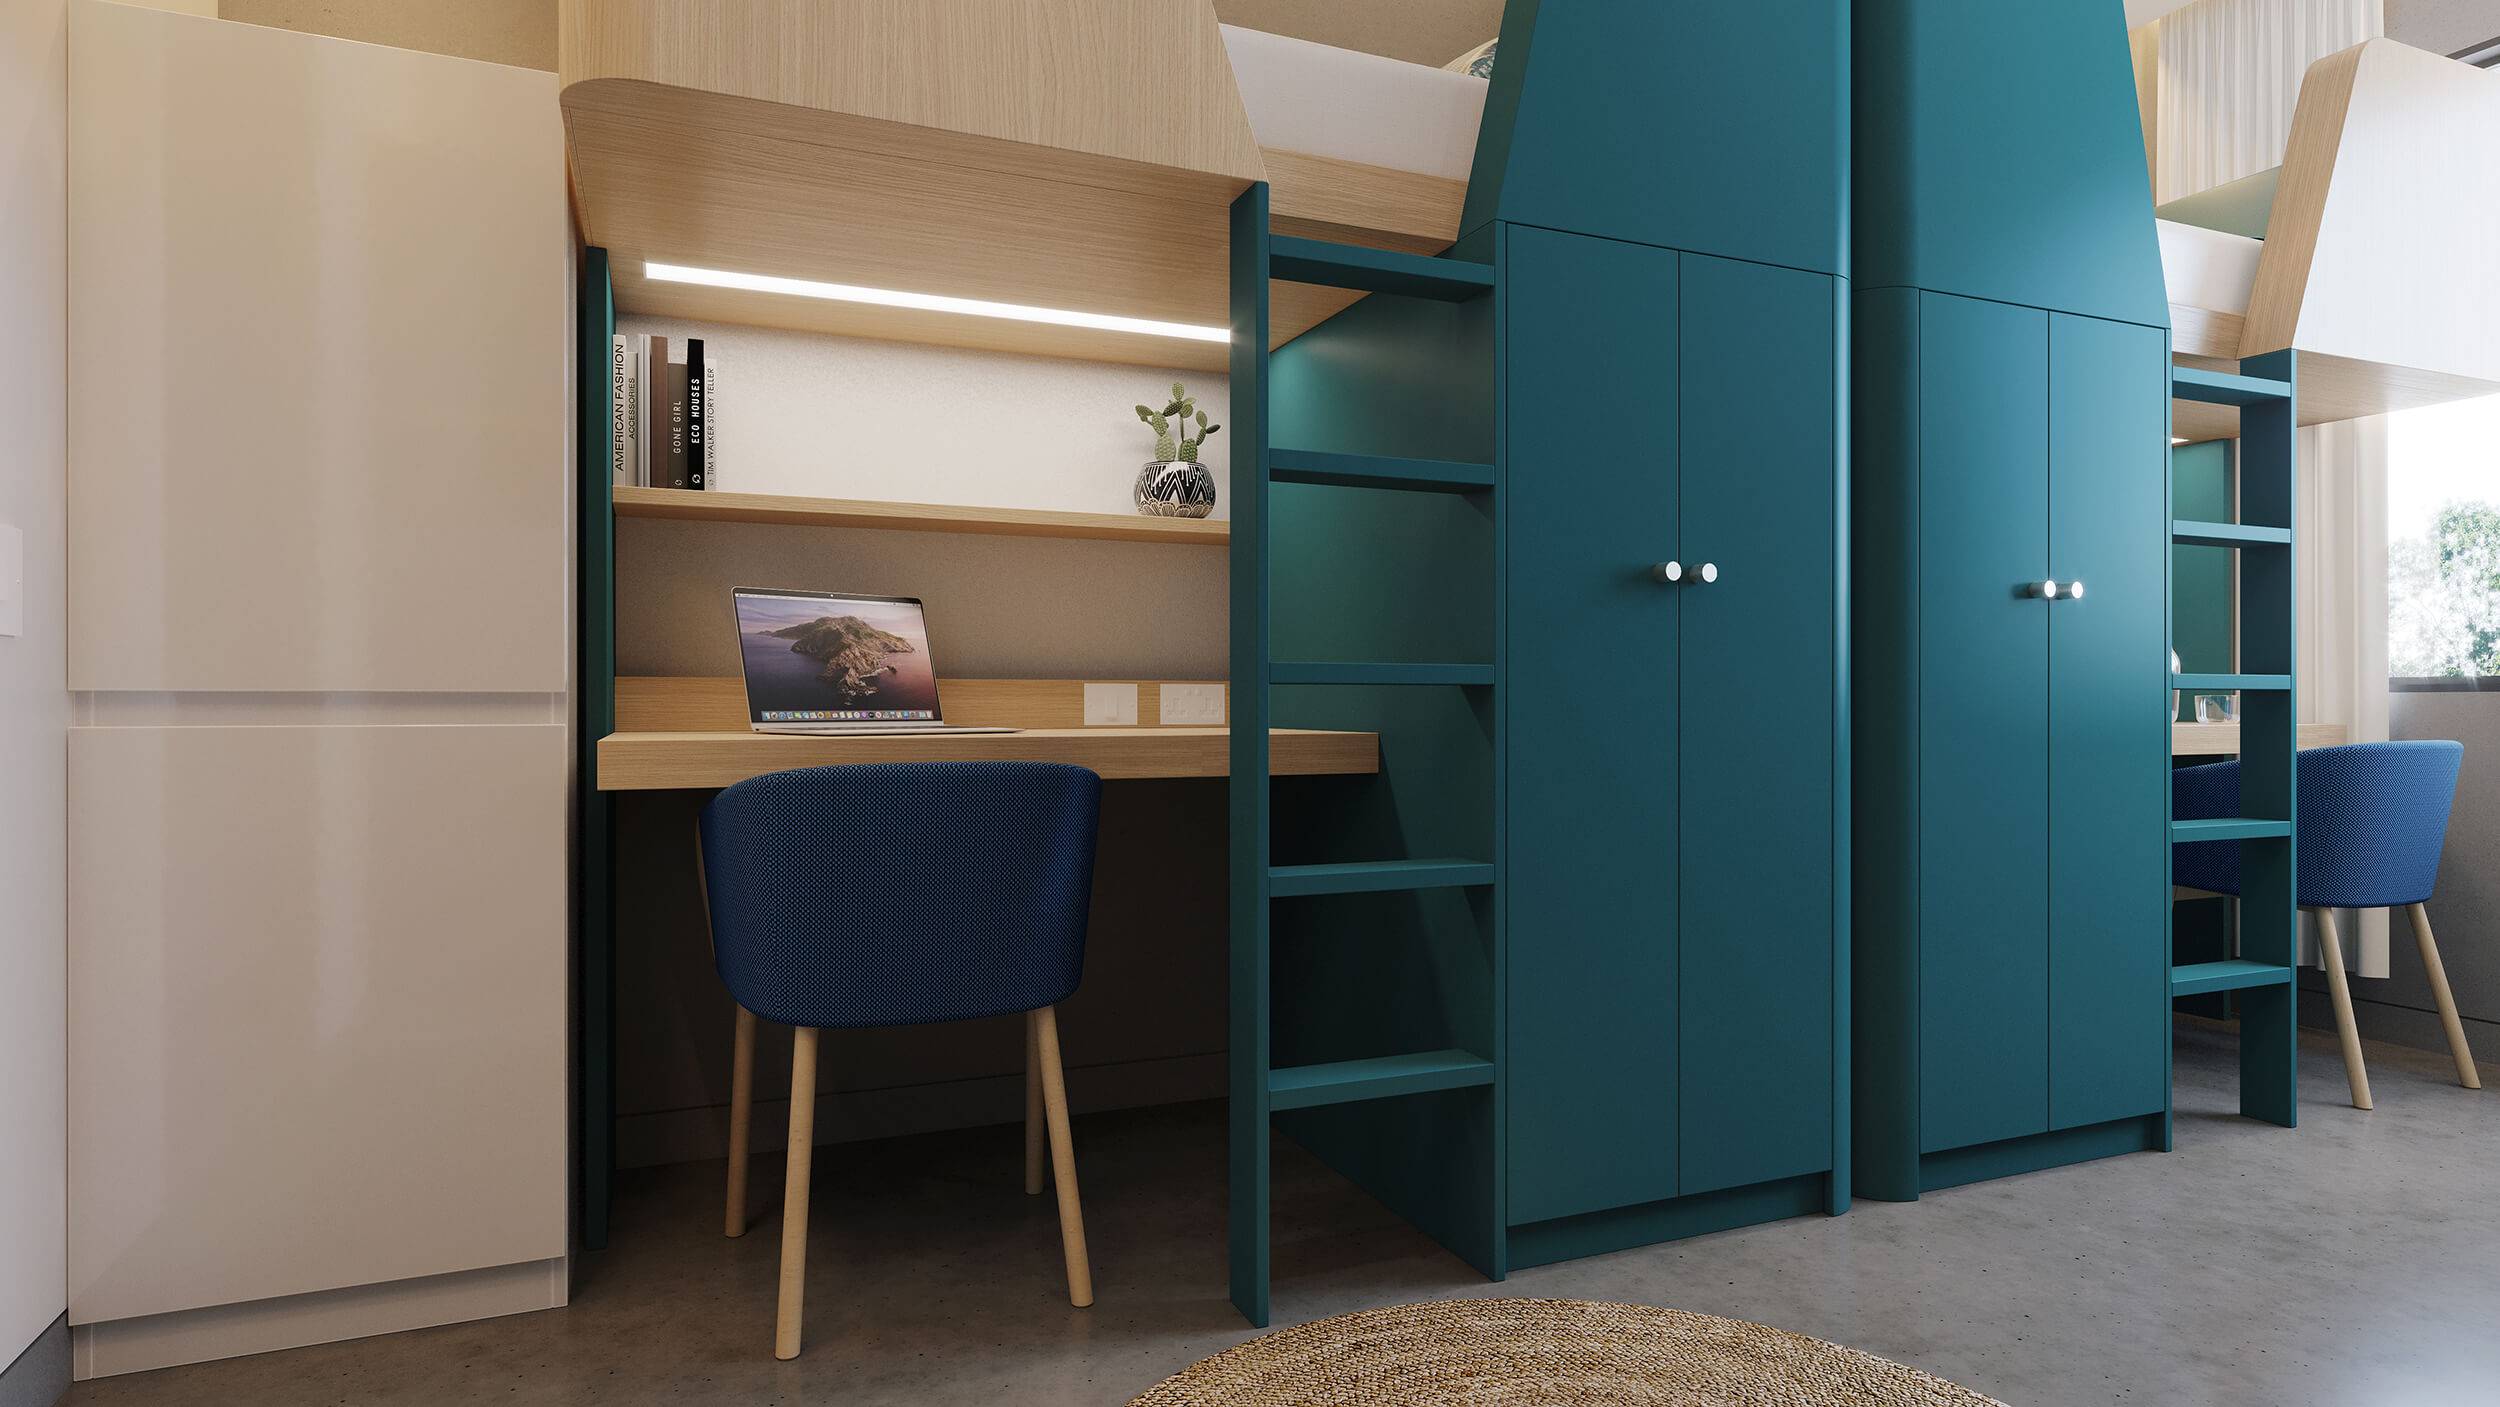 Two bunk bed type spaces. Two desks and chairs with a shelf unit above each desk. To the side of each is a wardrobe and ladder, which leads to a bunk bed